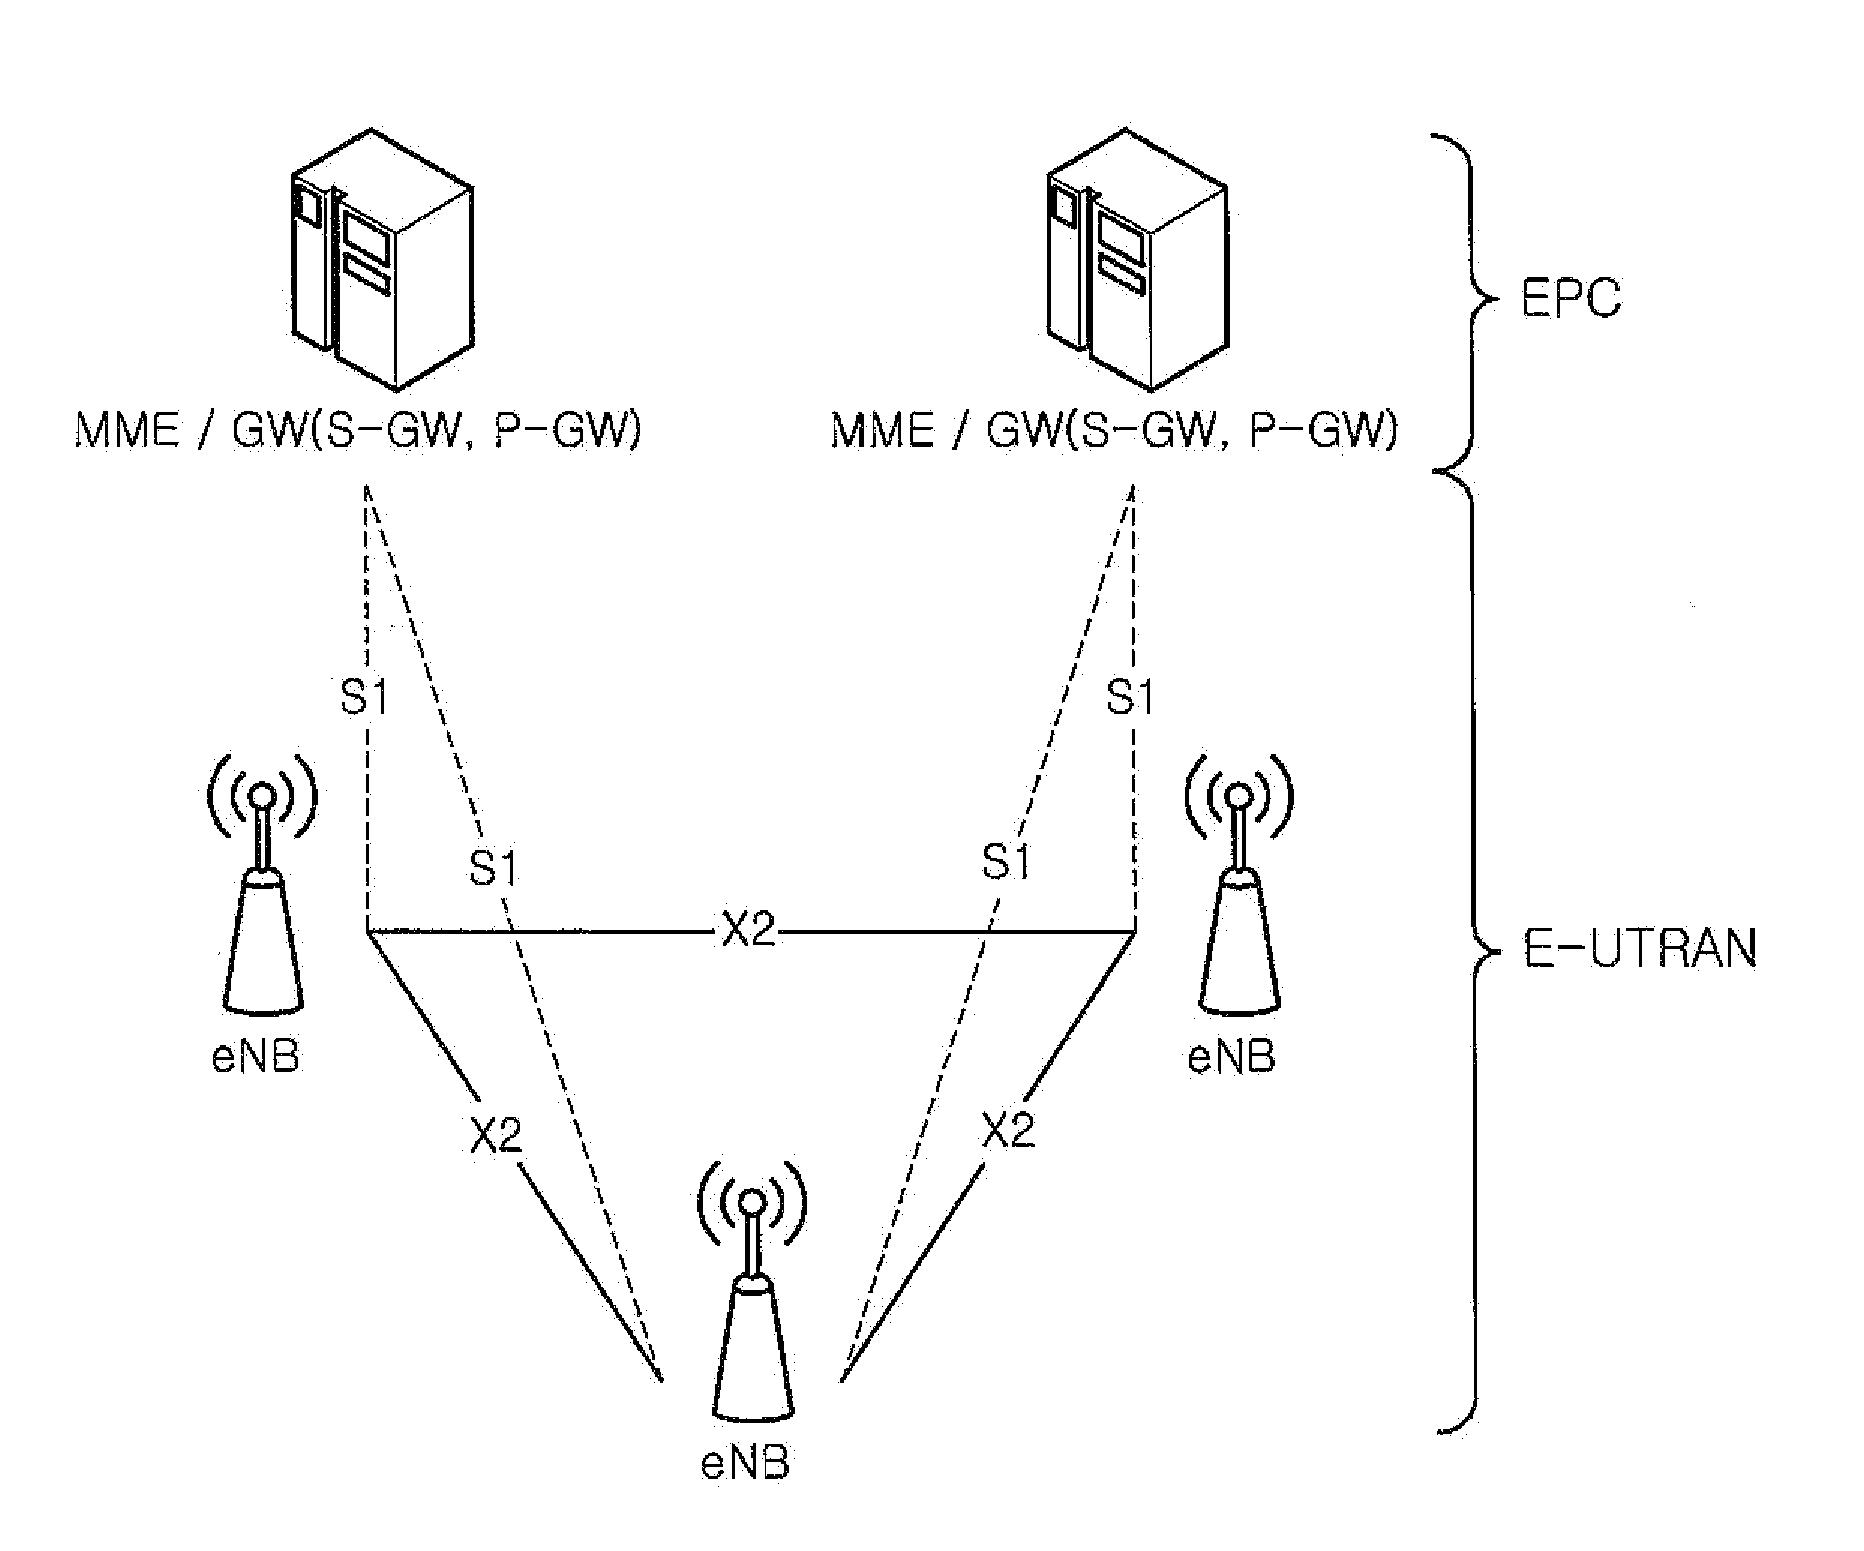 HANDOVER METHOD BETWEEN eNBs IN MOBILE COMMUNICATION SYSTEM